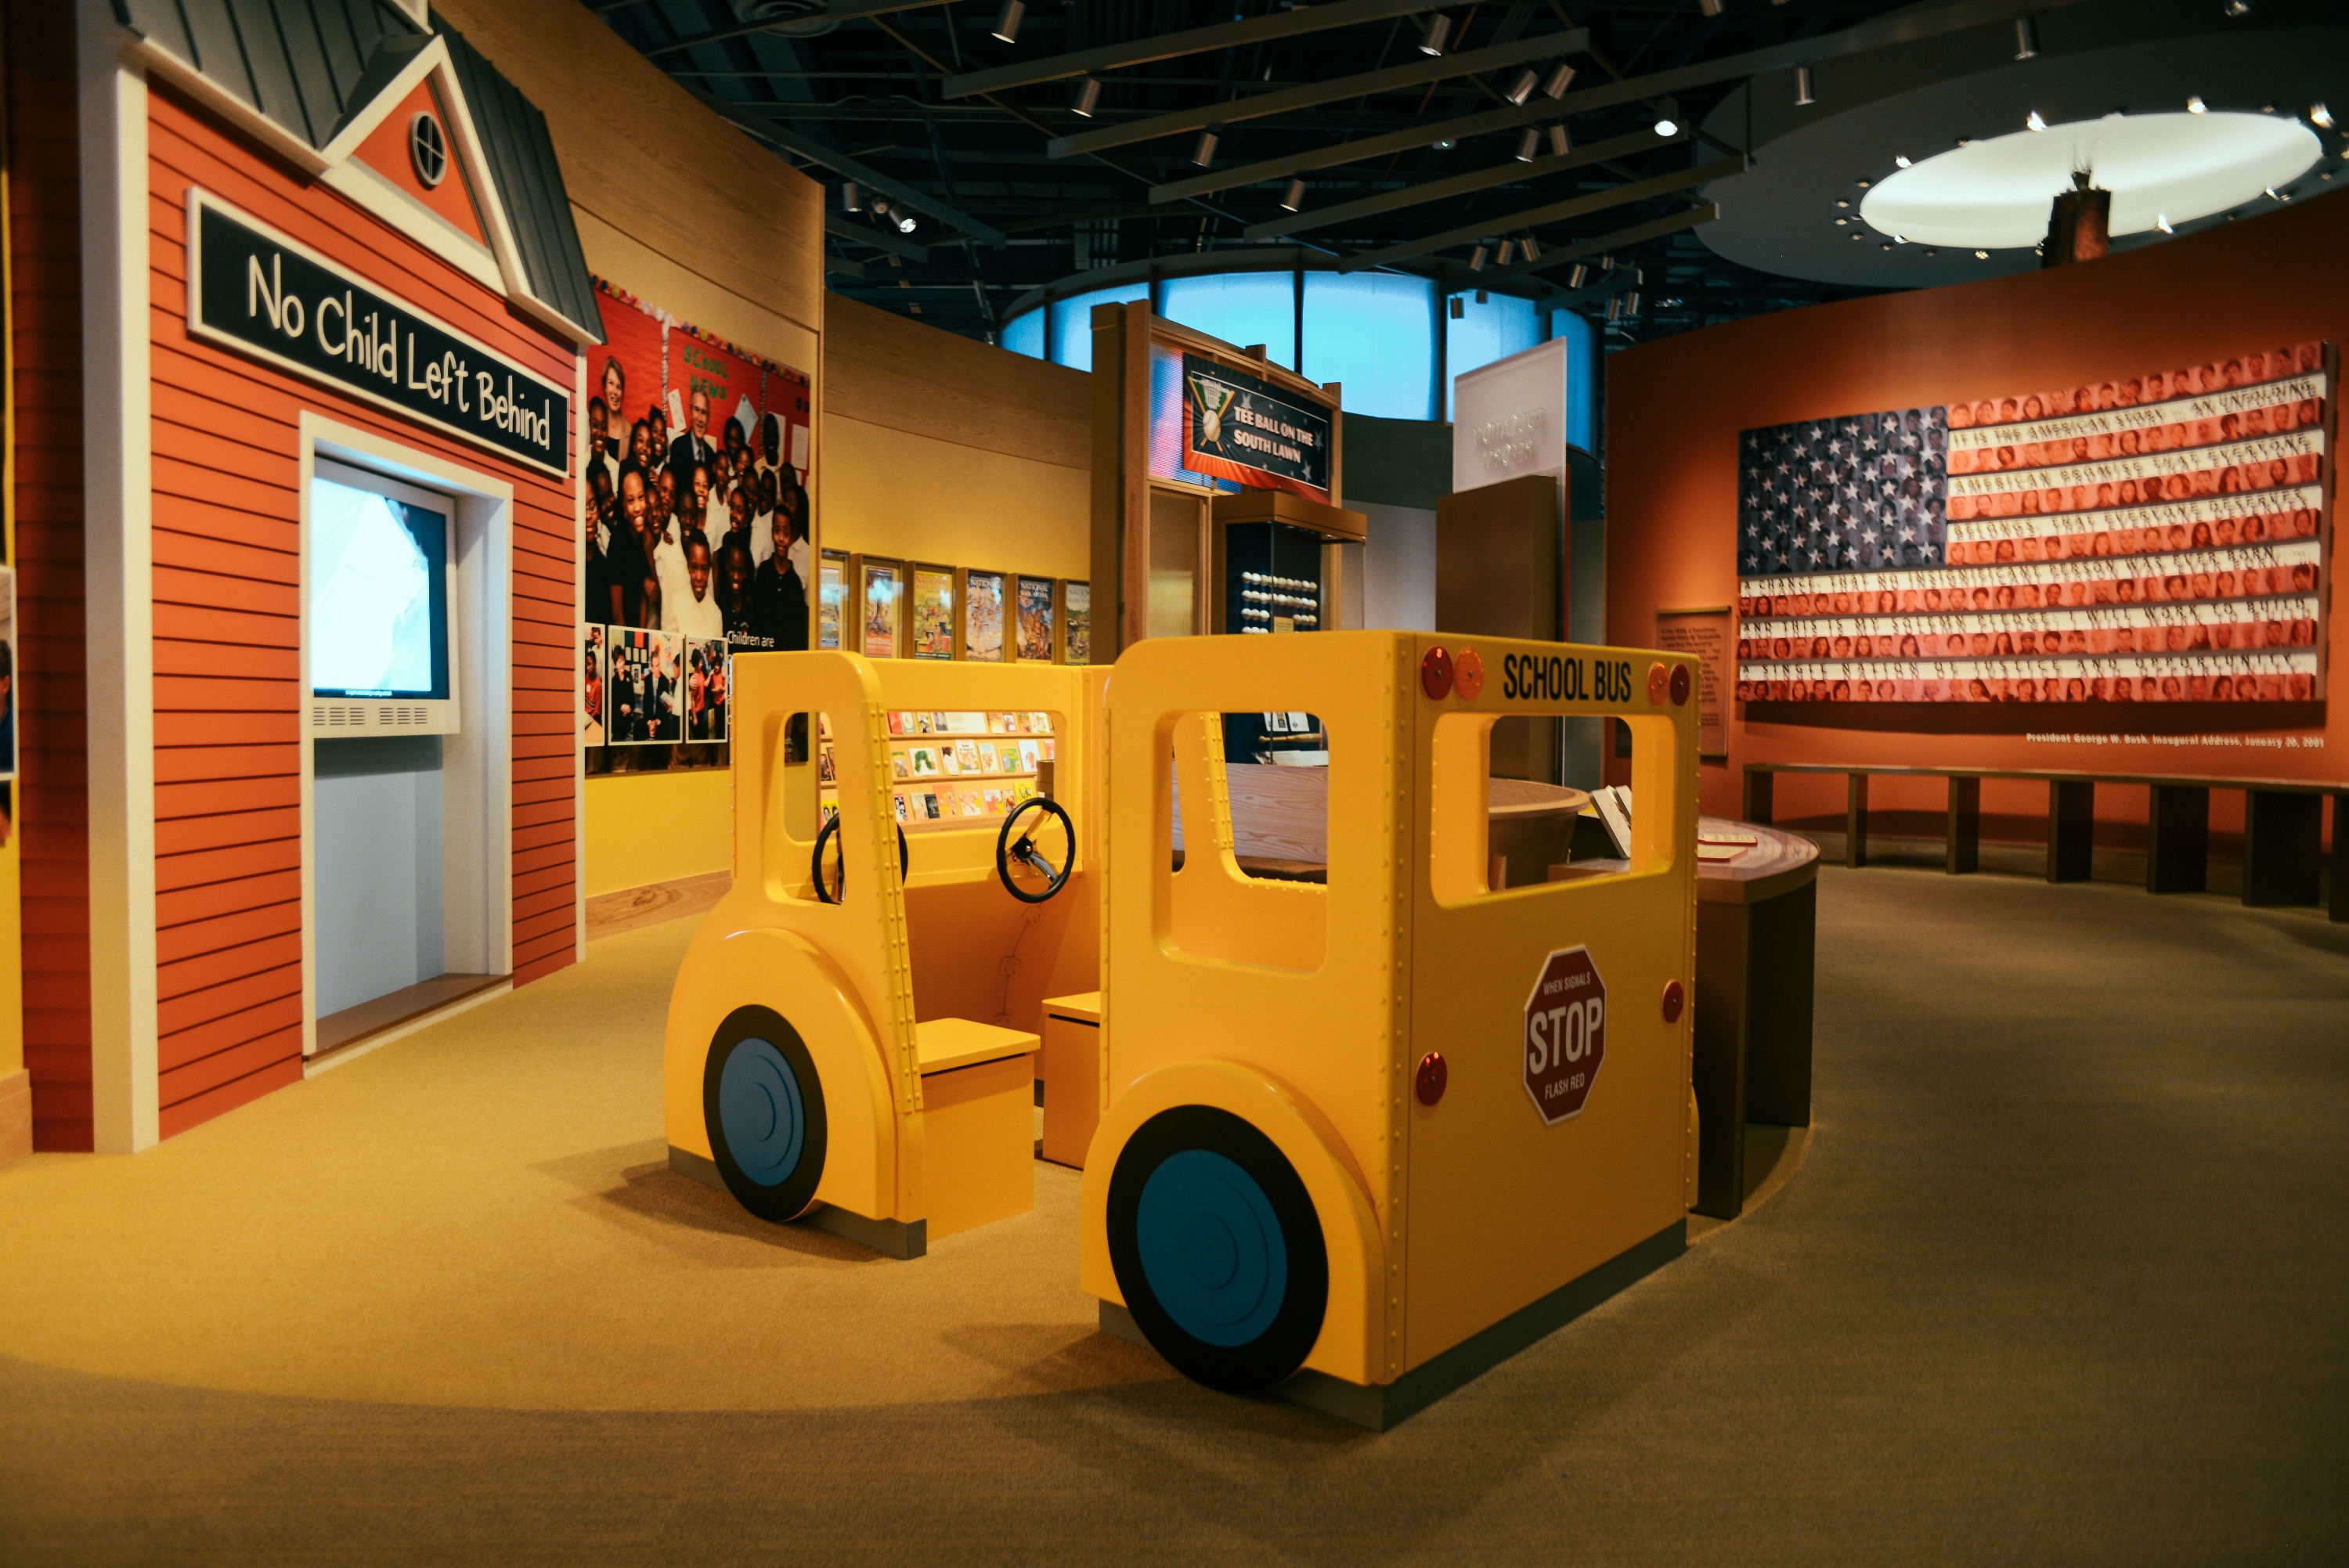 The No Child Left Behind School Bus display at the George W Bush Library and Museum